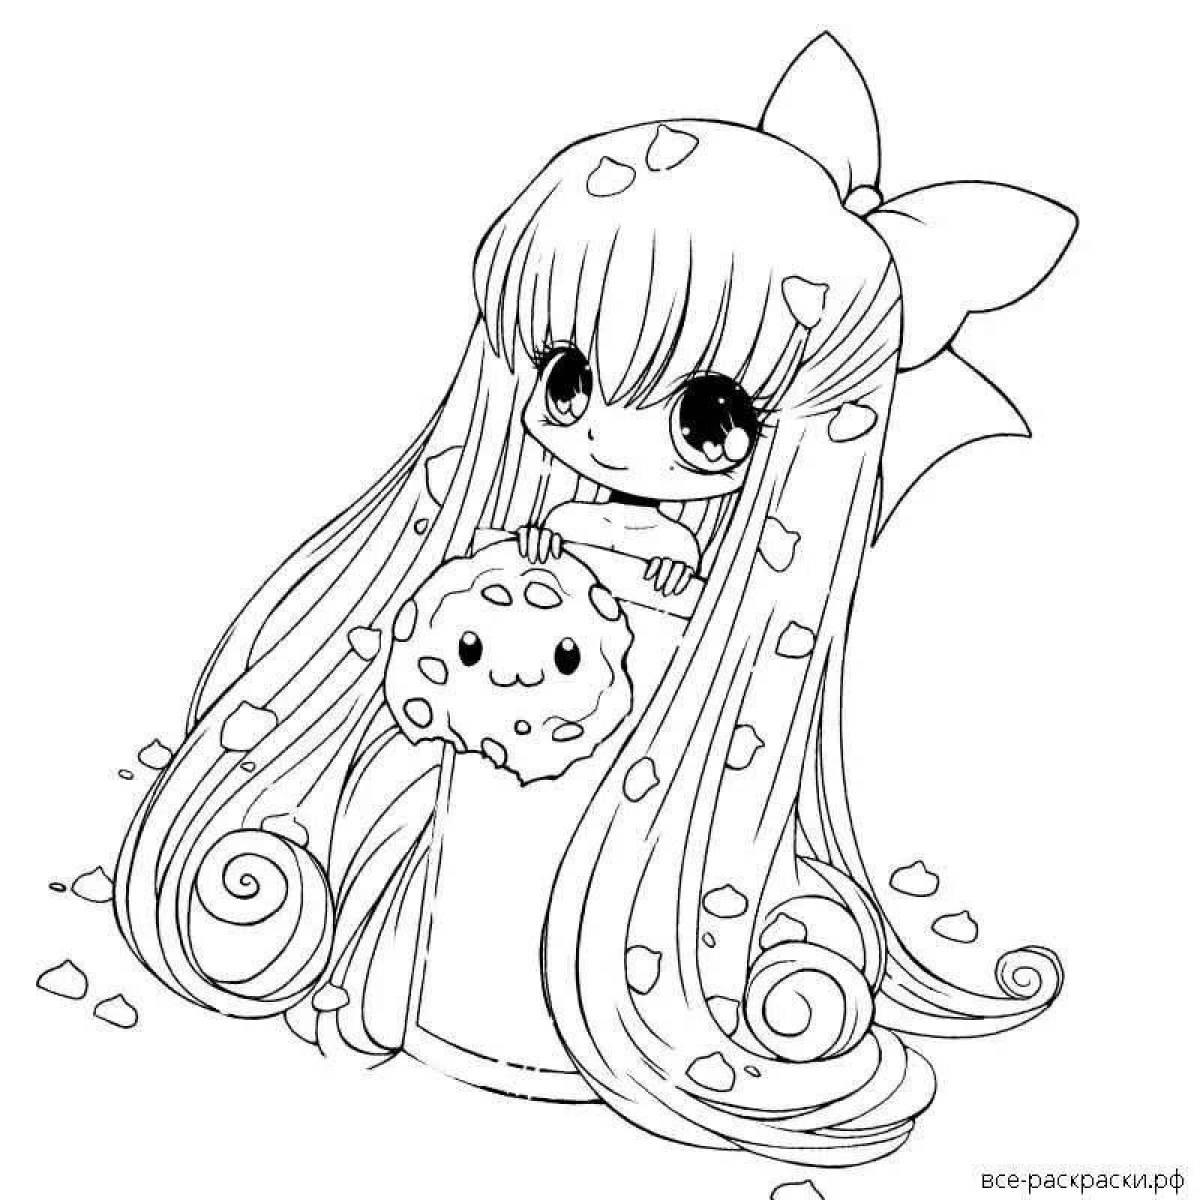 Coloring pages for cute anime girls